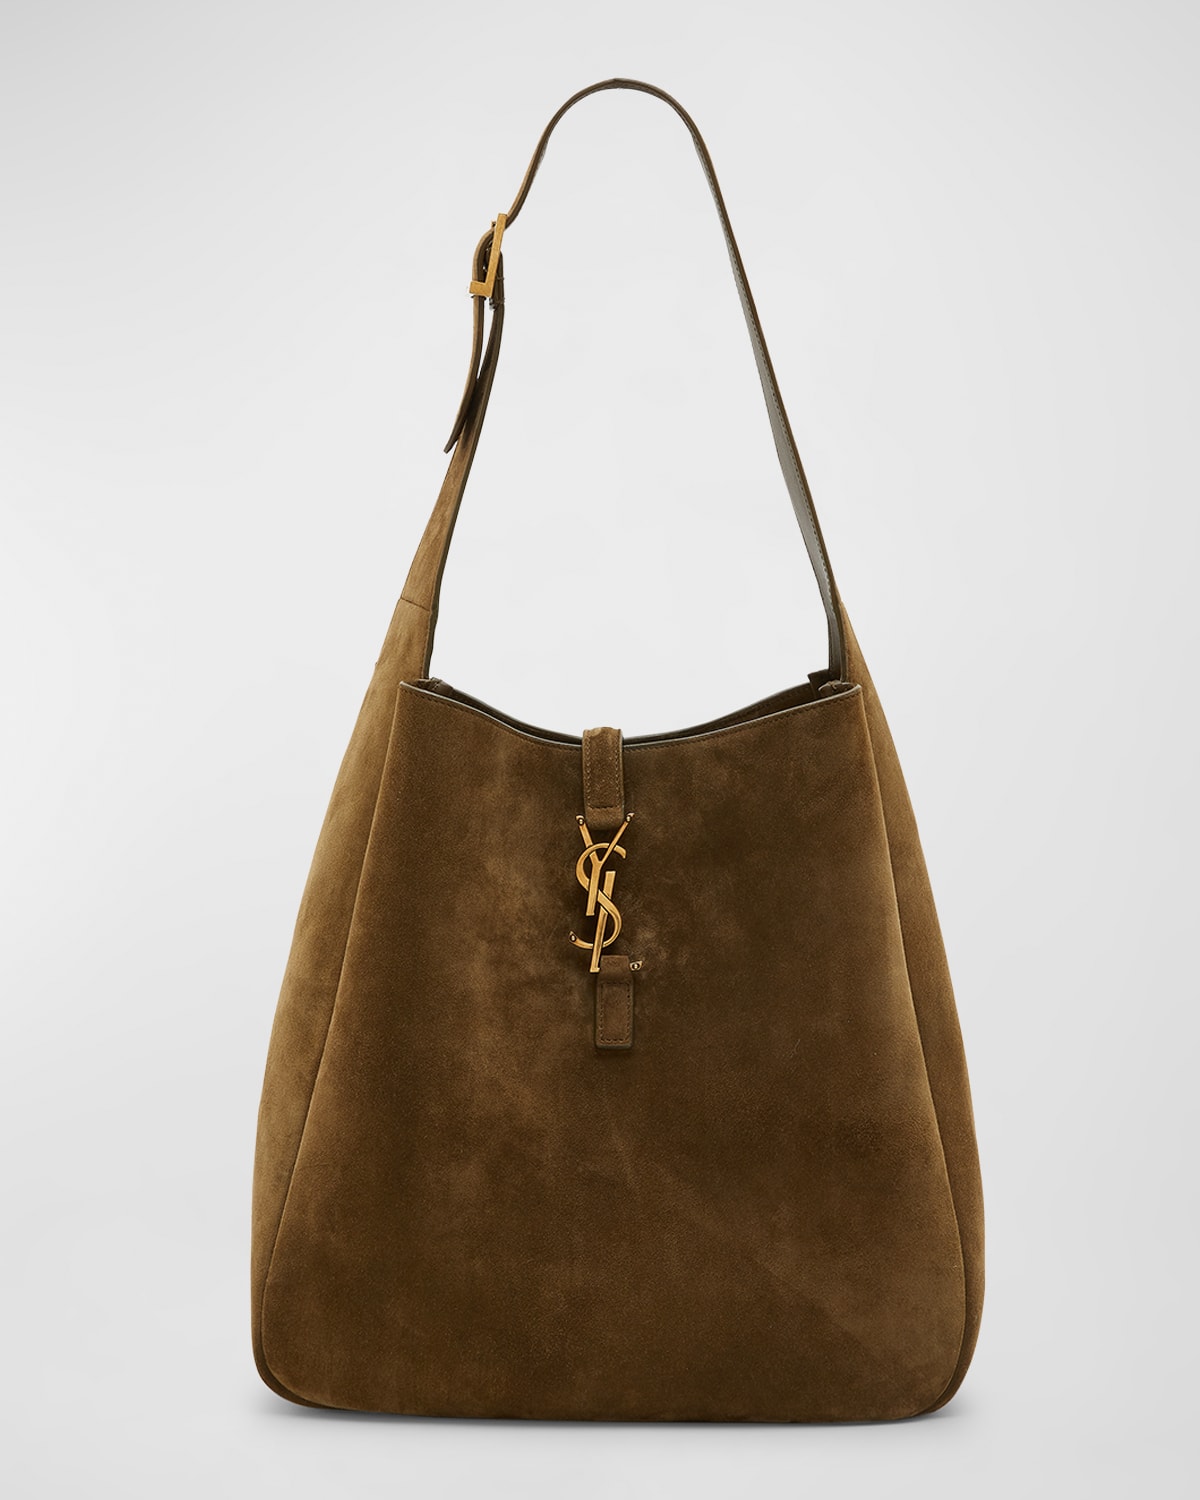 SAINT LAURENT LE 5 A 7 LARGE YSL HOBO BAG IN SUEDE